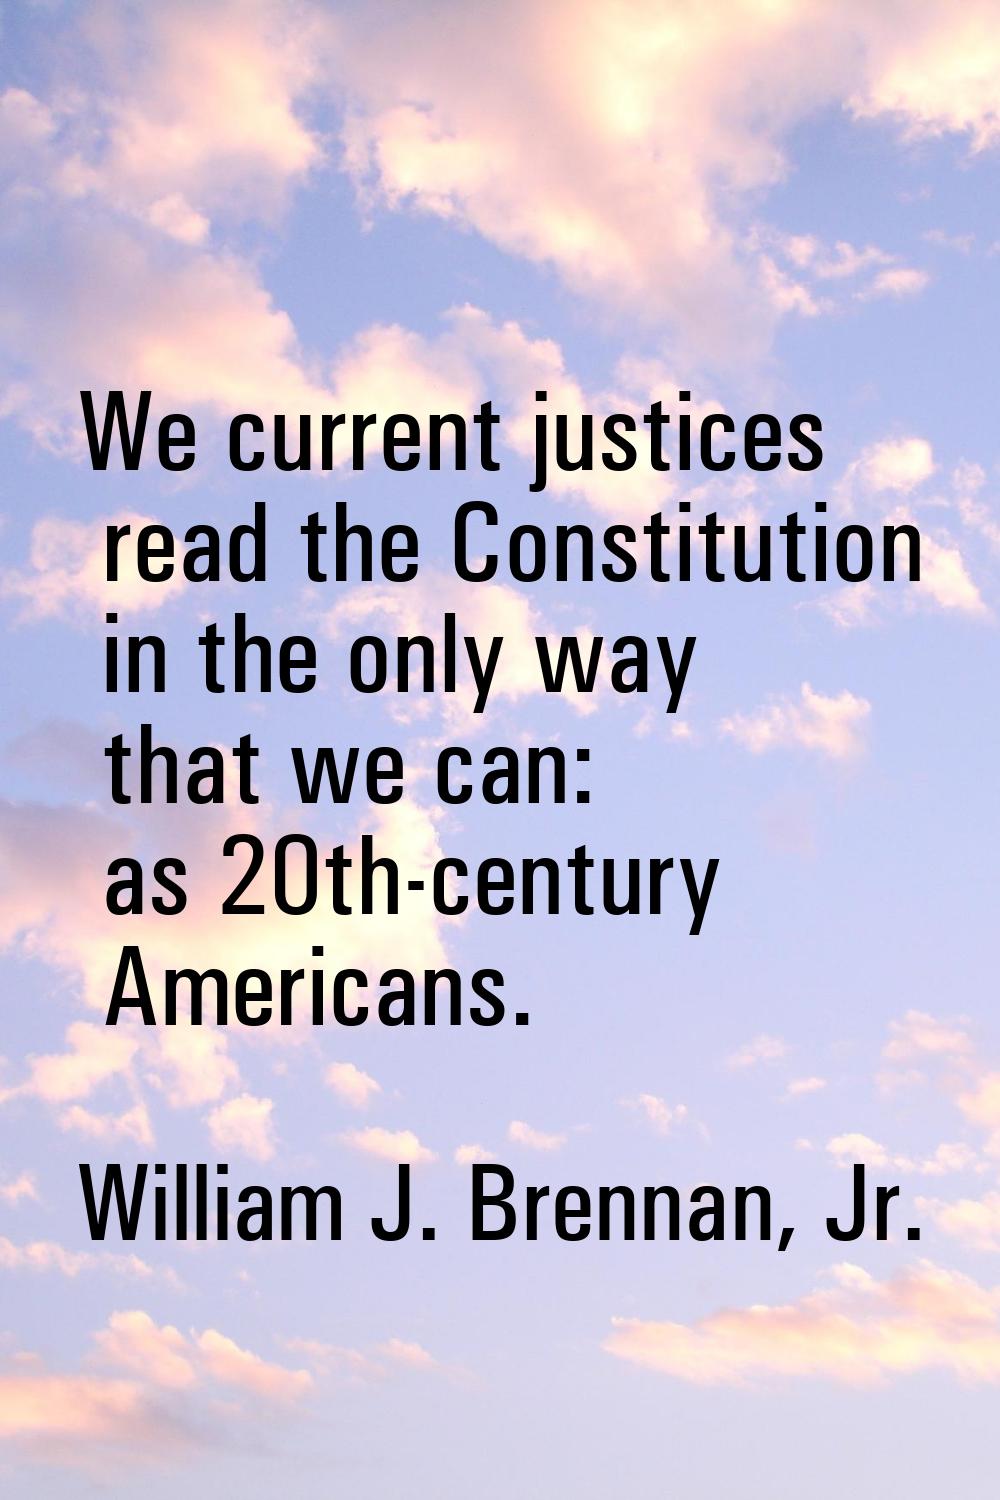 We current justices read the Constitution in the only way that we can: as 20th-century Americans.